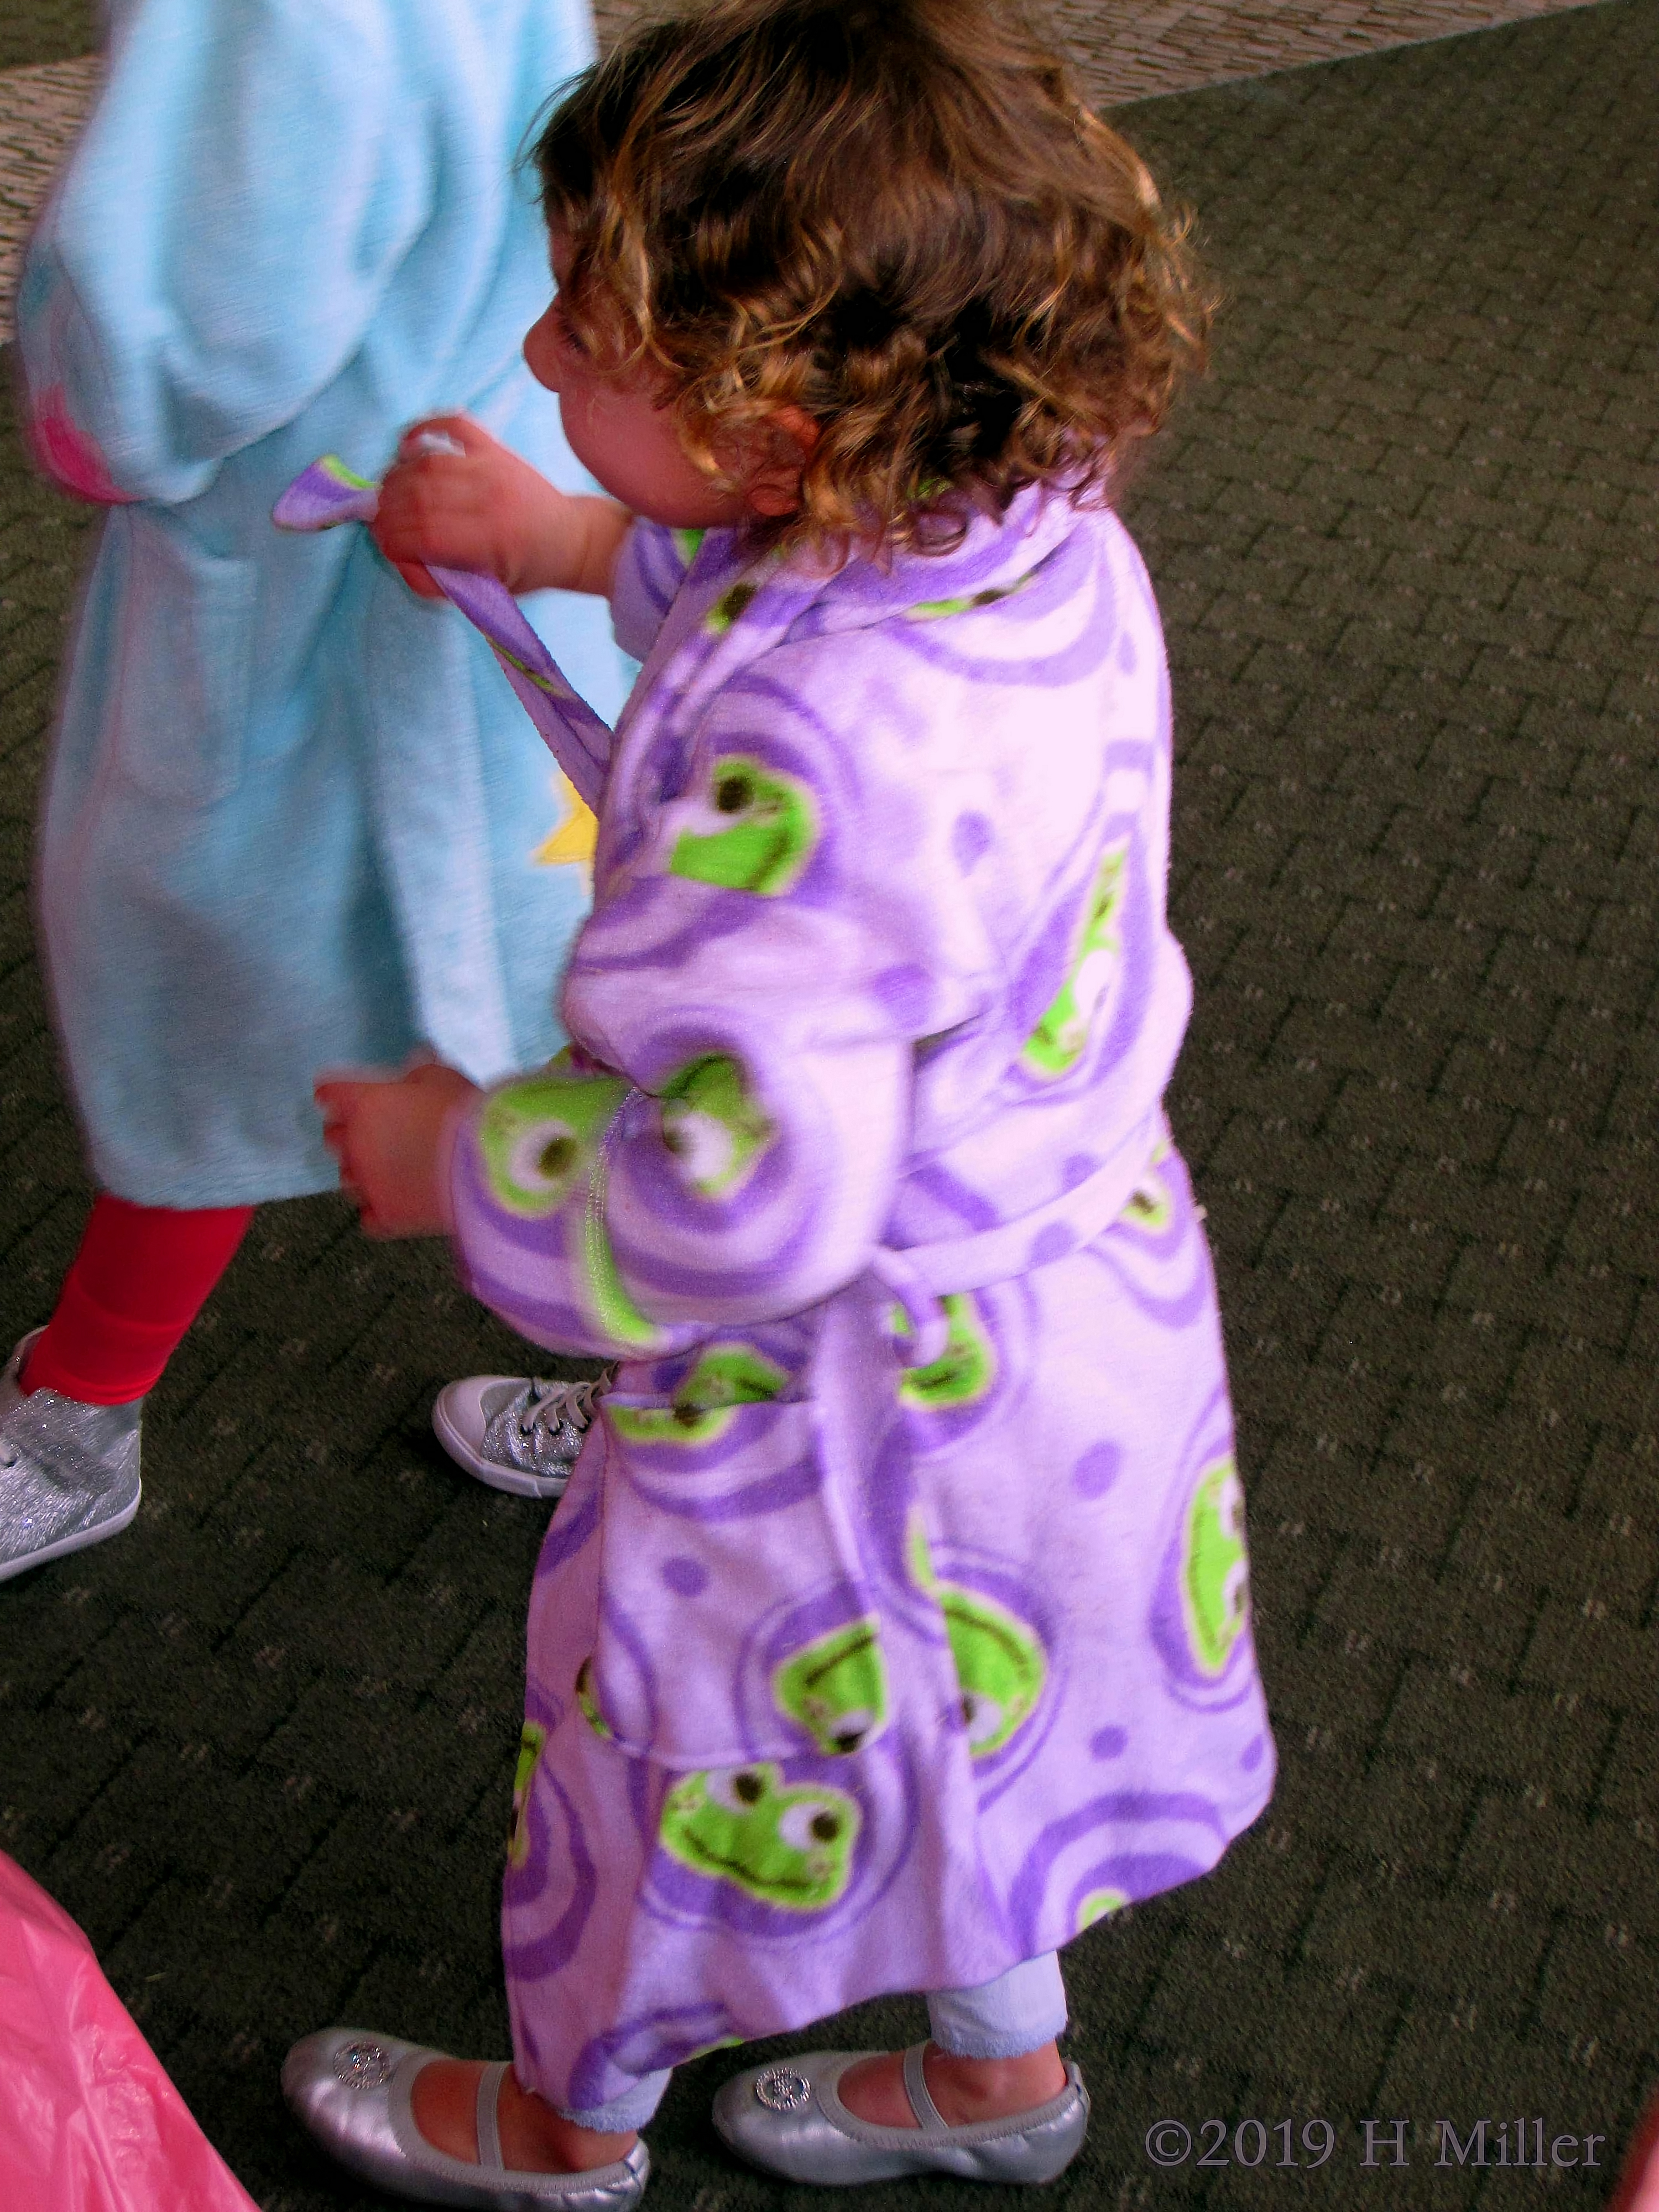 Tying The Sash On Her Frog Spa Robe!